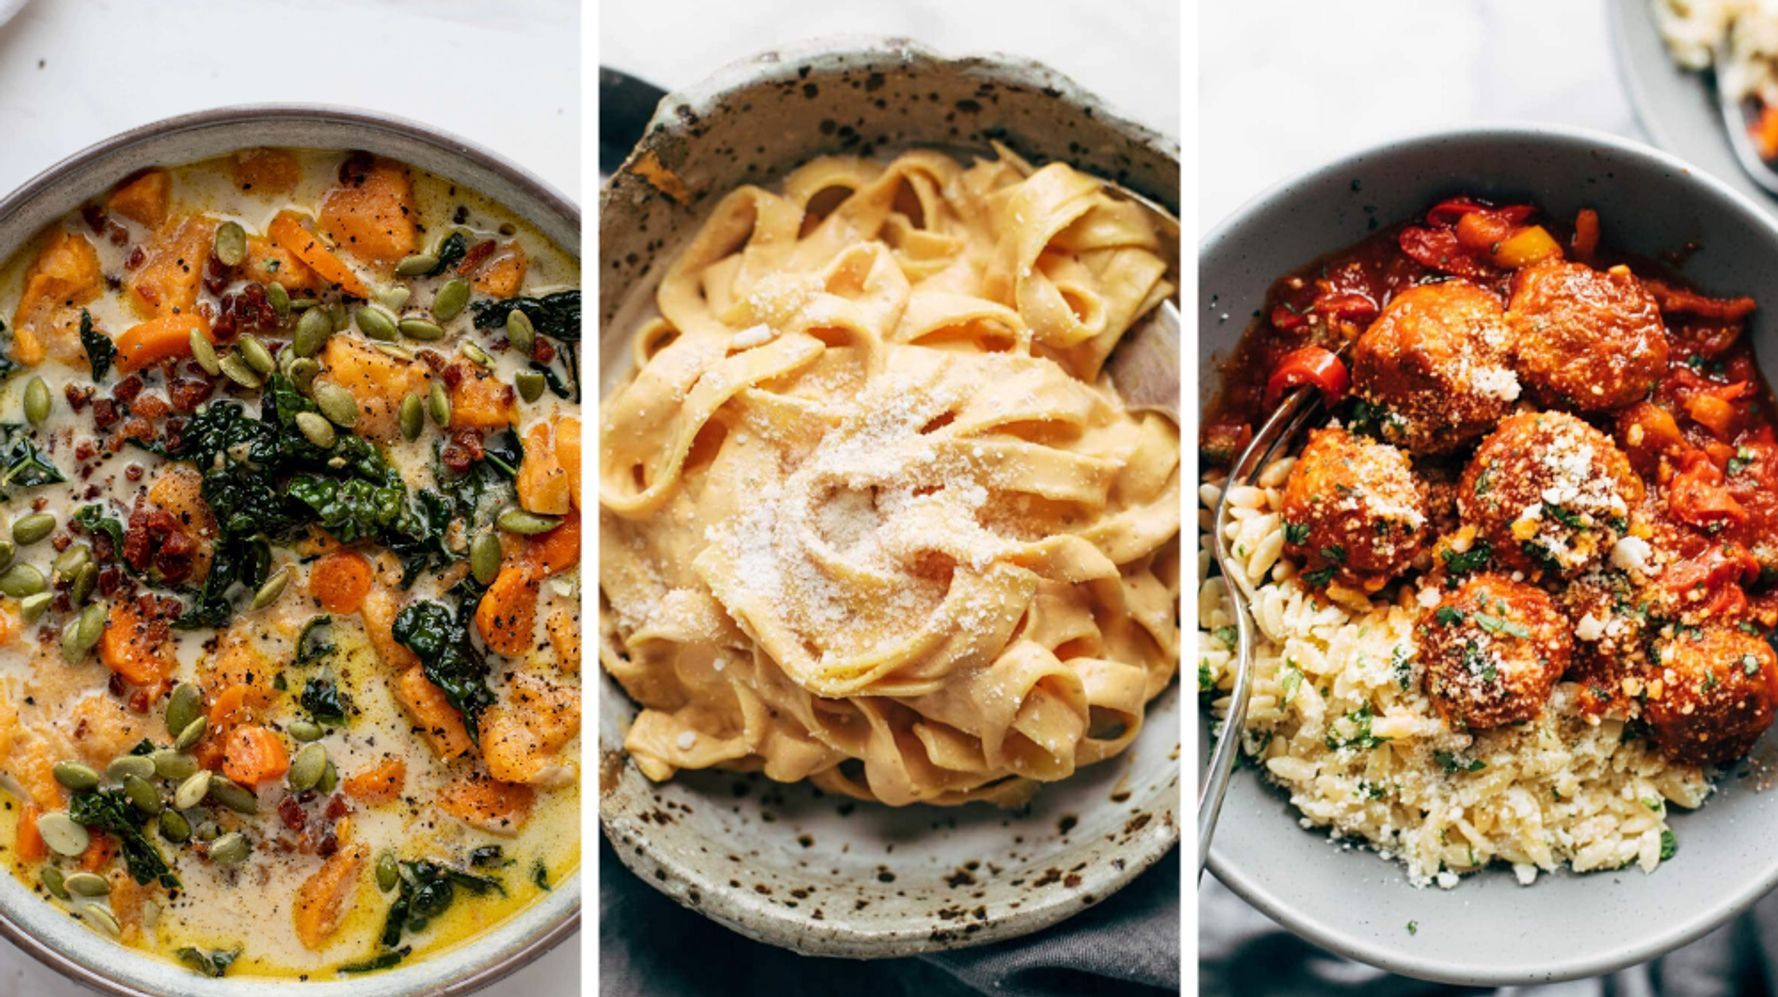 The 10 Most Popular Instagram Recipes From October 2019 | HuffPost ...